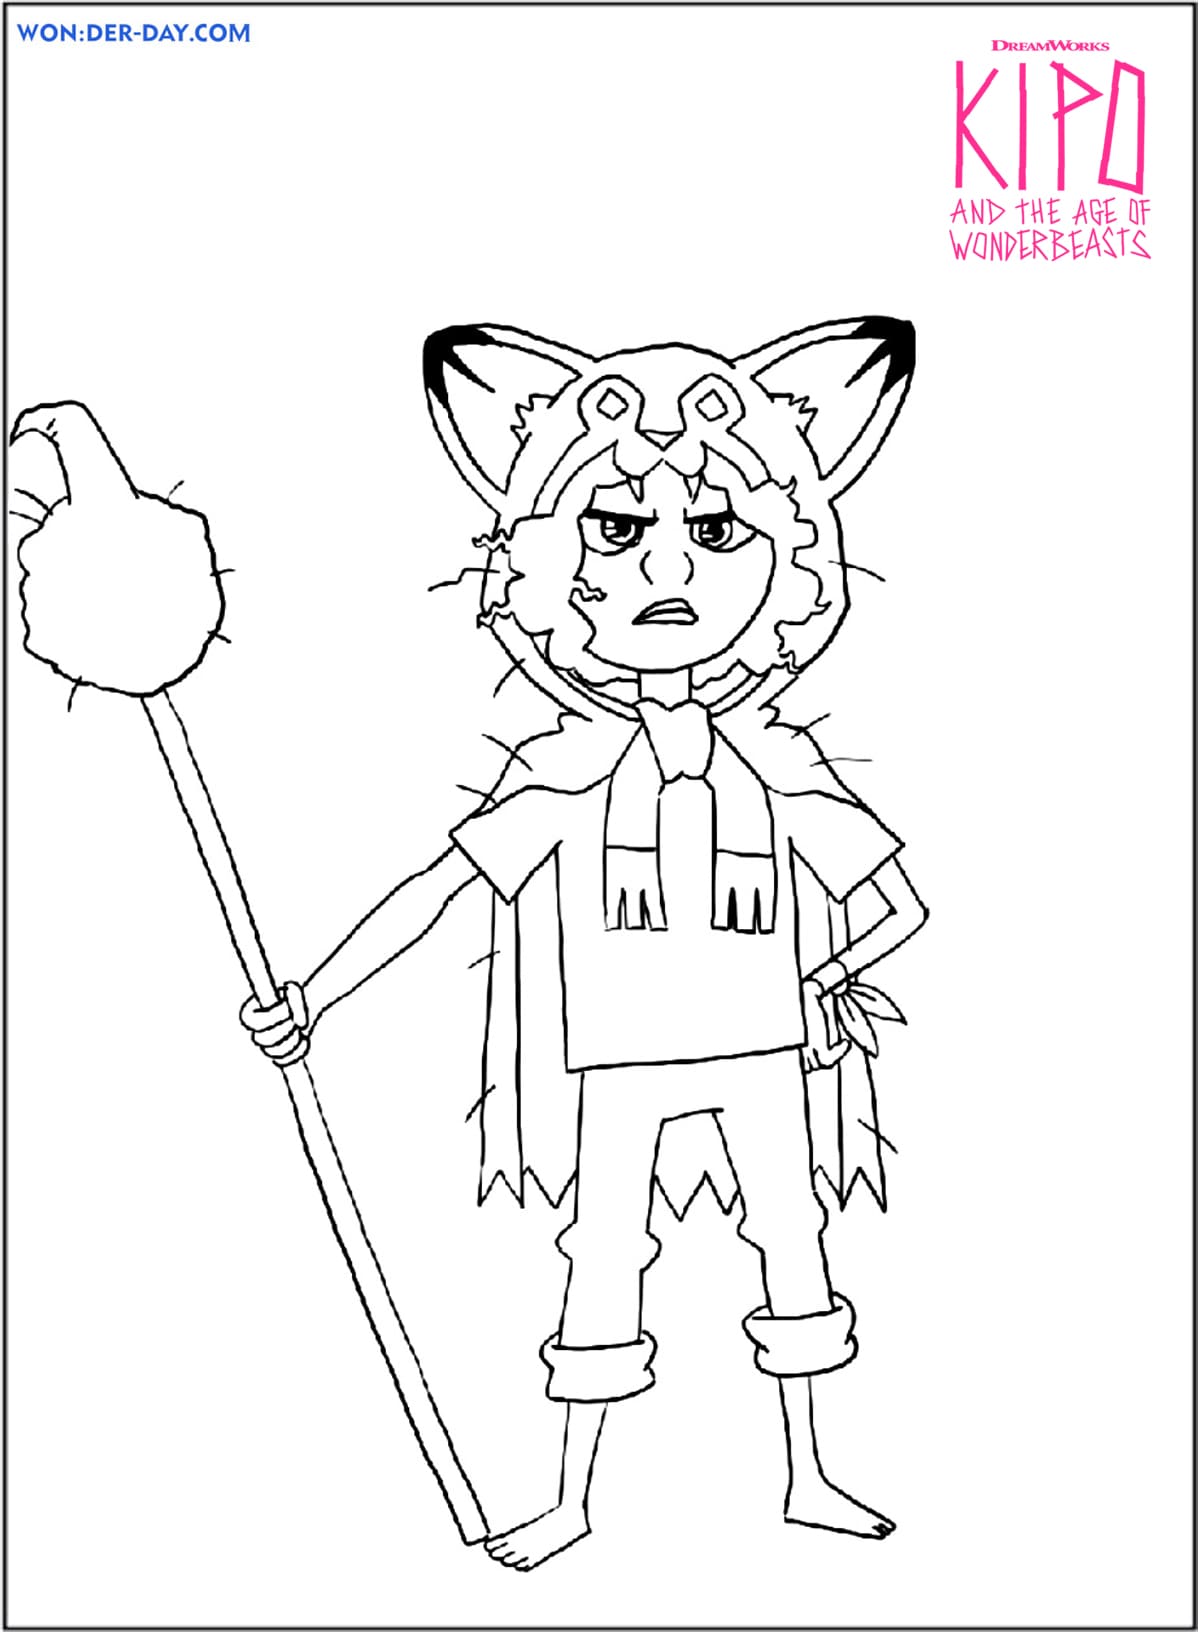 Kipo and the Age of Wonderbeasts coloring pages | WONDER DAY — Coloring